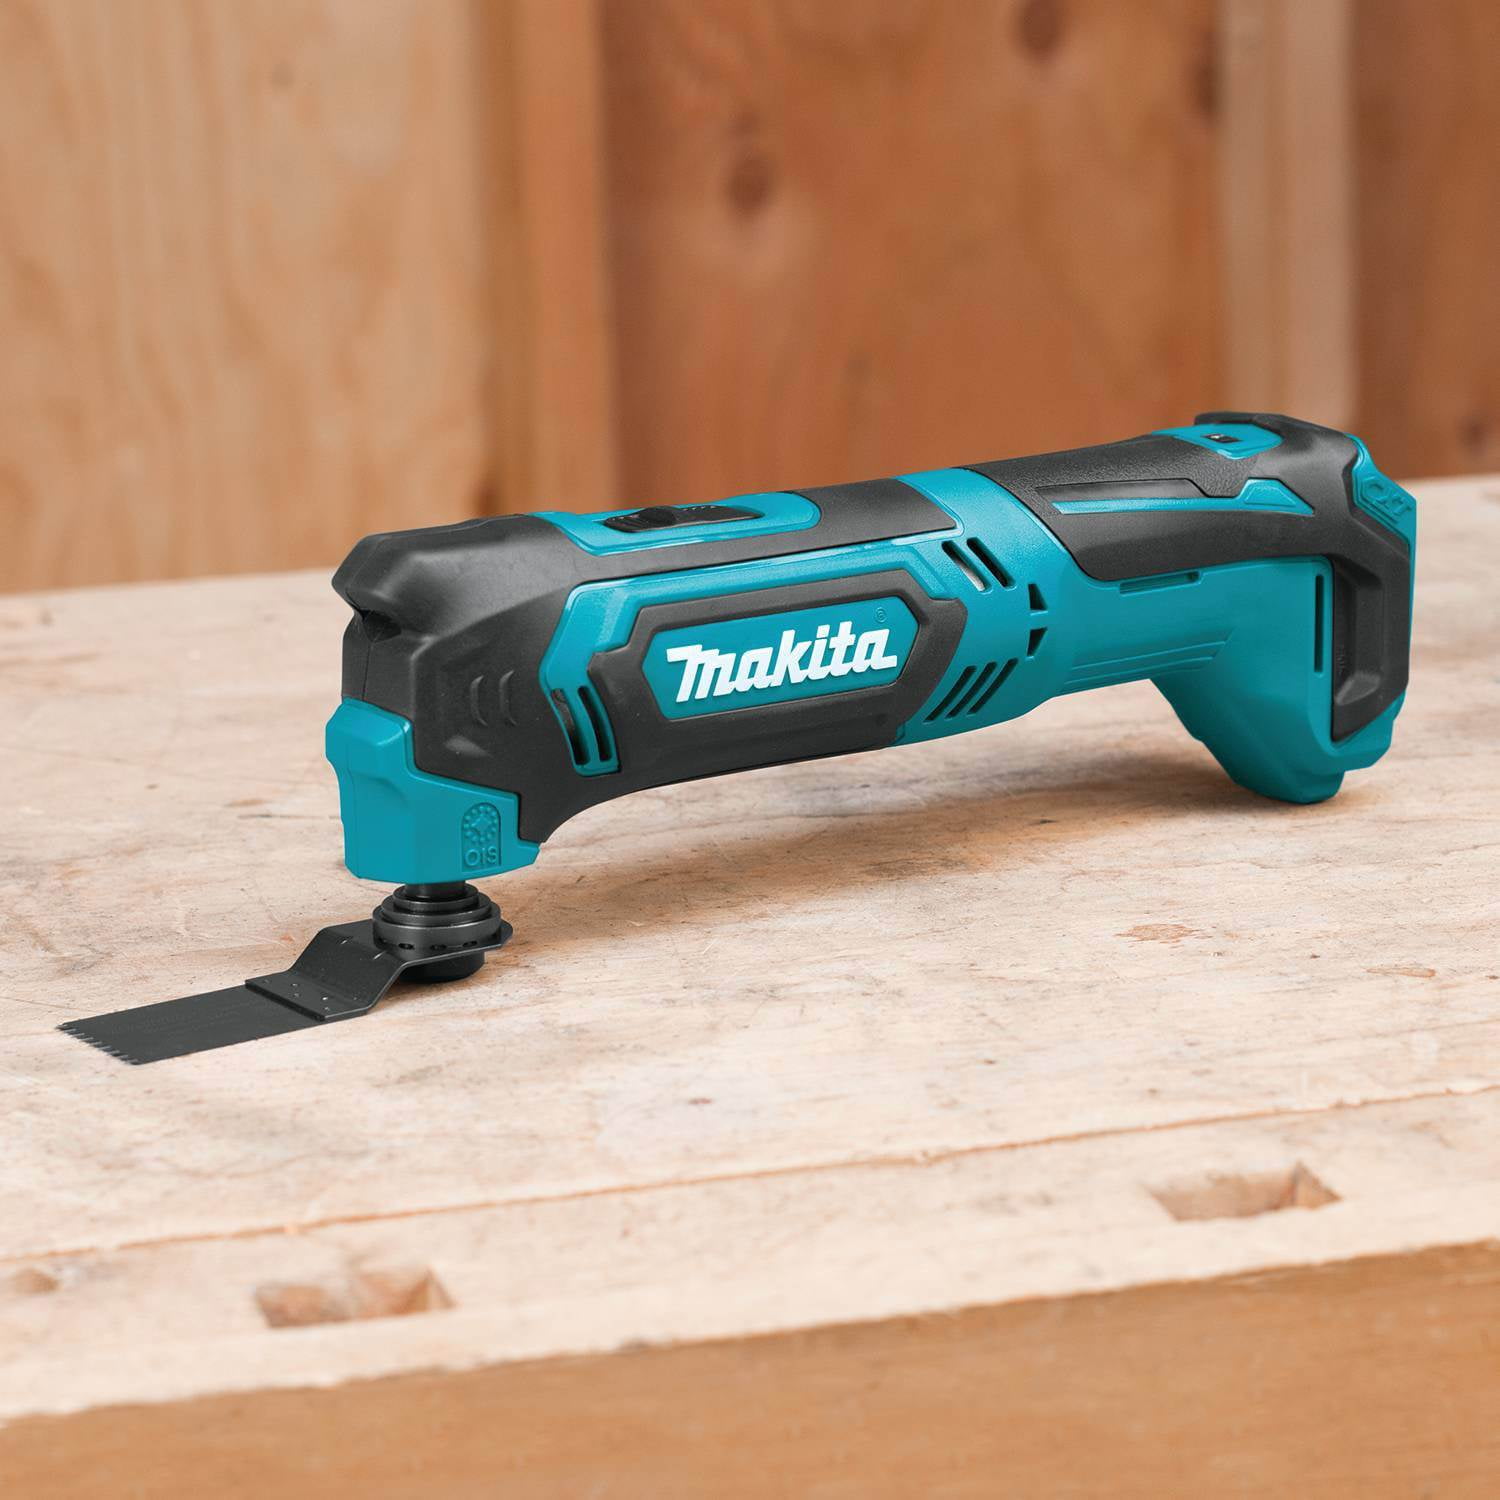 Cordless Oscillating Tool Compatible with Makita Battery, Brushless-Motor  Tool with Auxiliary Handle, Oscillating Multi-Tool for Scraping